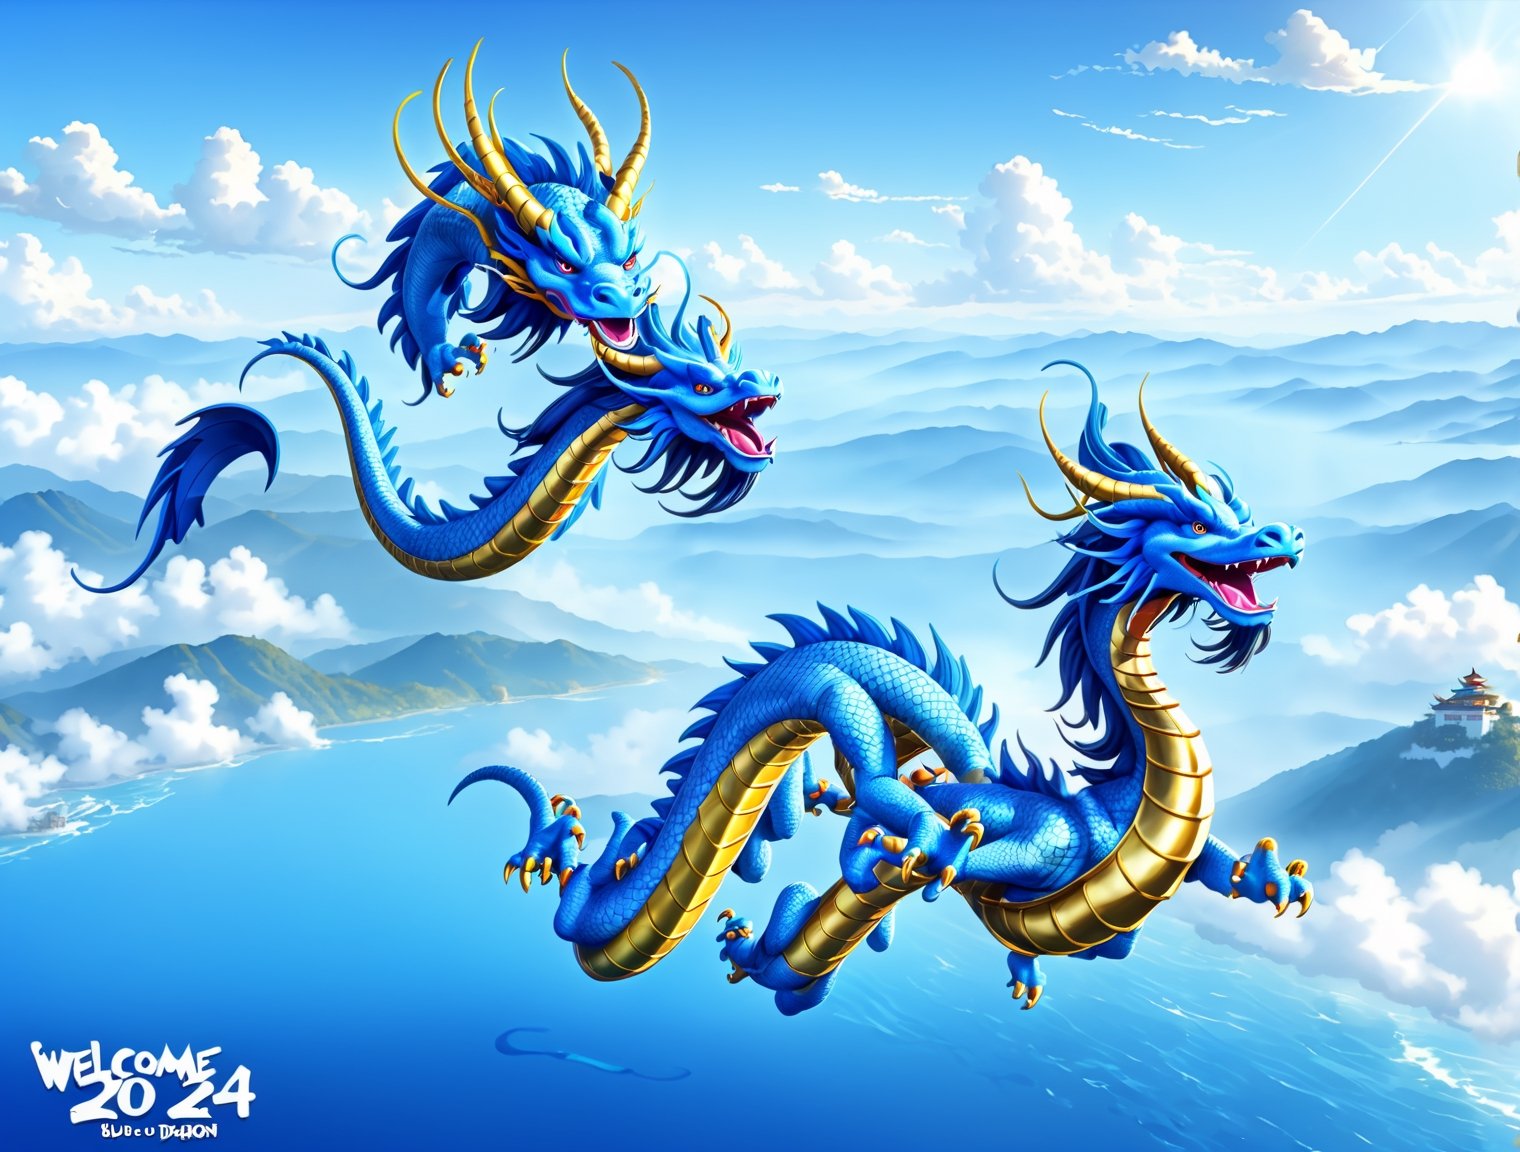 ((1 Asian blue dragon1.8)), asian blue dragon flying in the sky flying in the sky,Asian blue dragon flying across the vast ocean horizon, epic daylight, solo, dynamic angle,aw0k euphoric style,normal blue dragon head,Text((“Welcome 2024” is written in gold at the top left of the screen 1.5)).((There is only one blue dragon head1.8)),Text